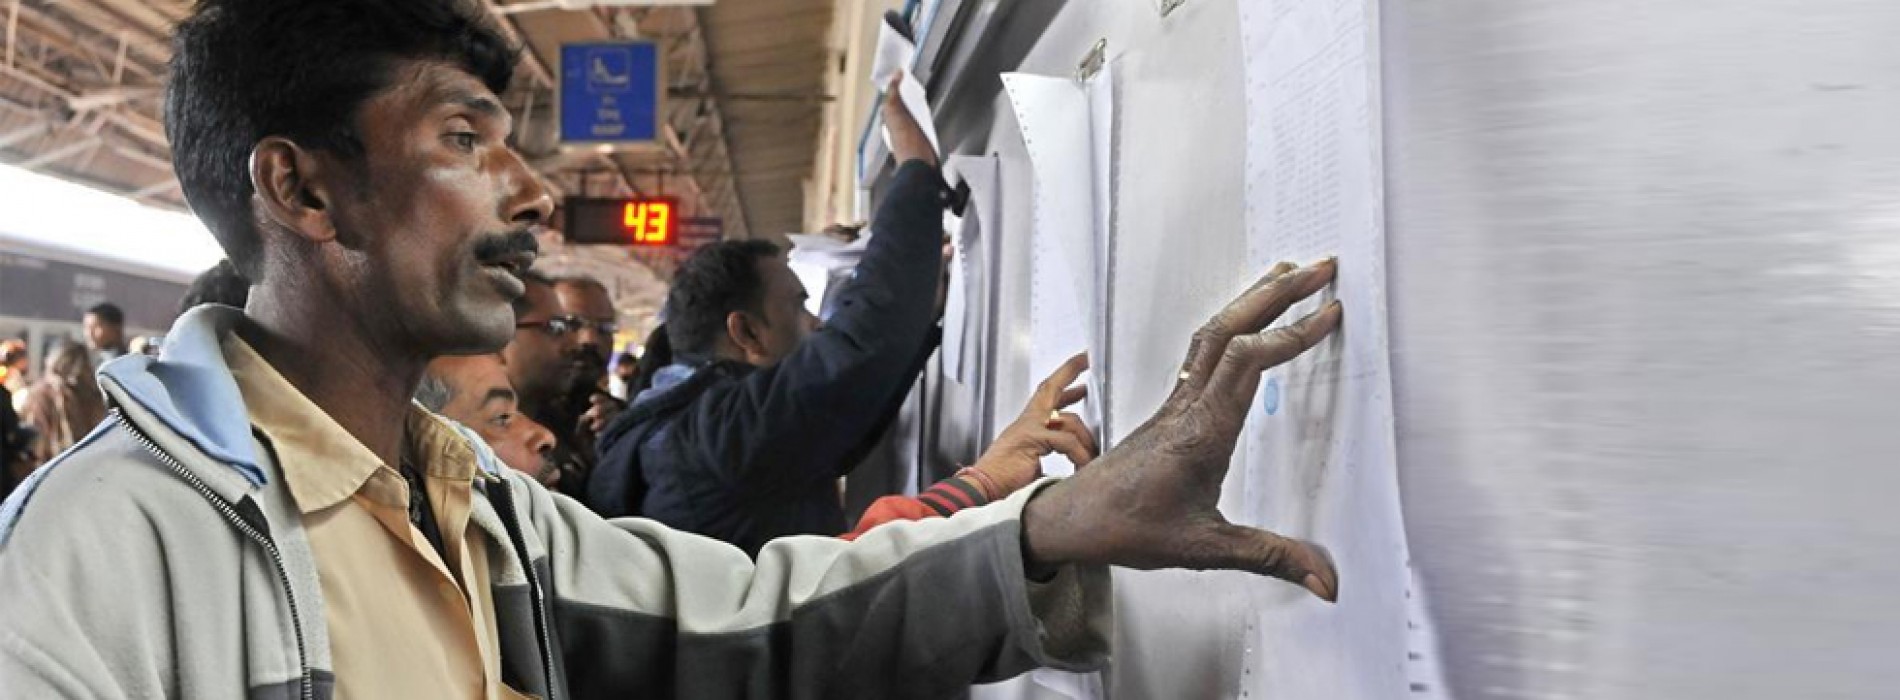 No more reservation charts on coaches in SER trains